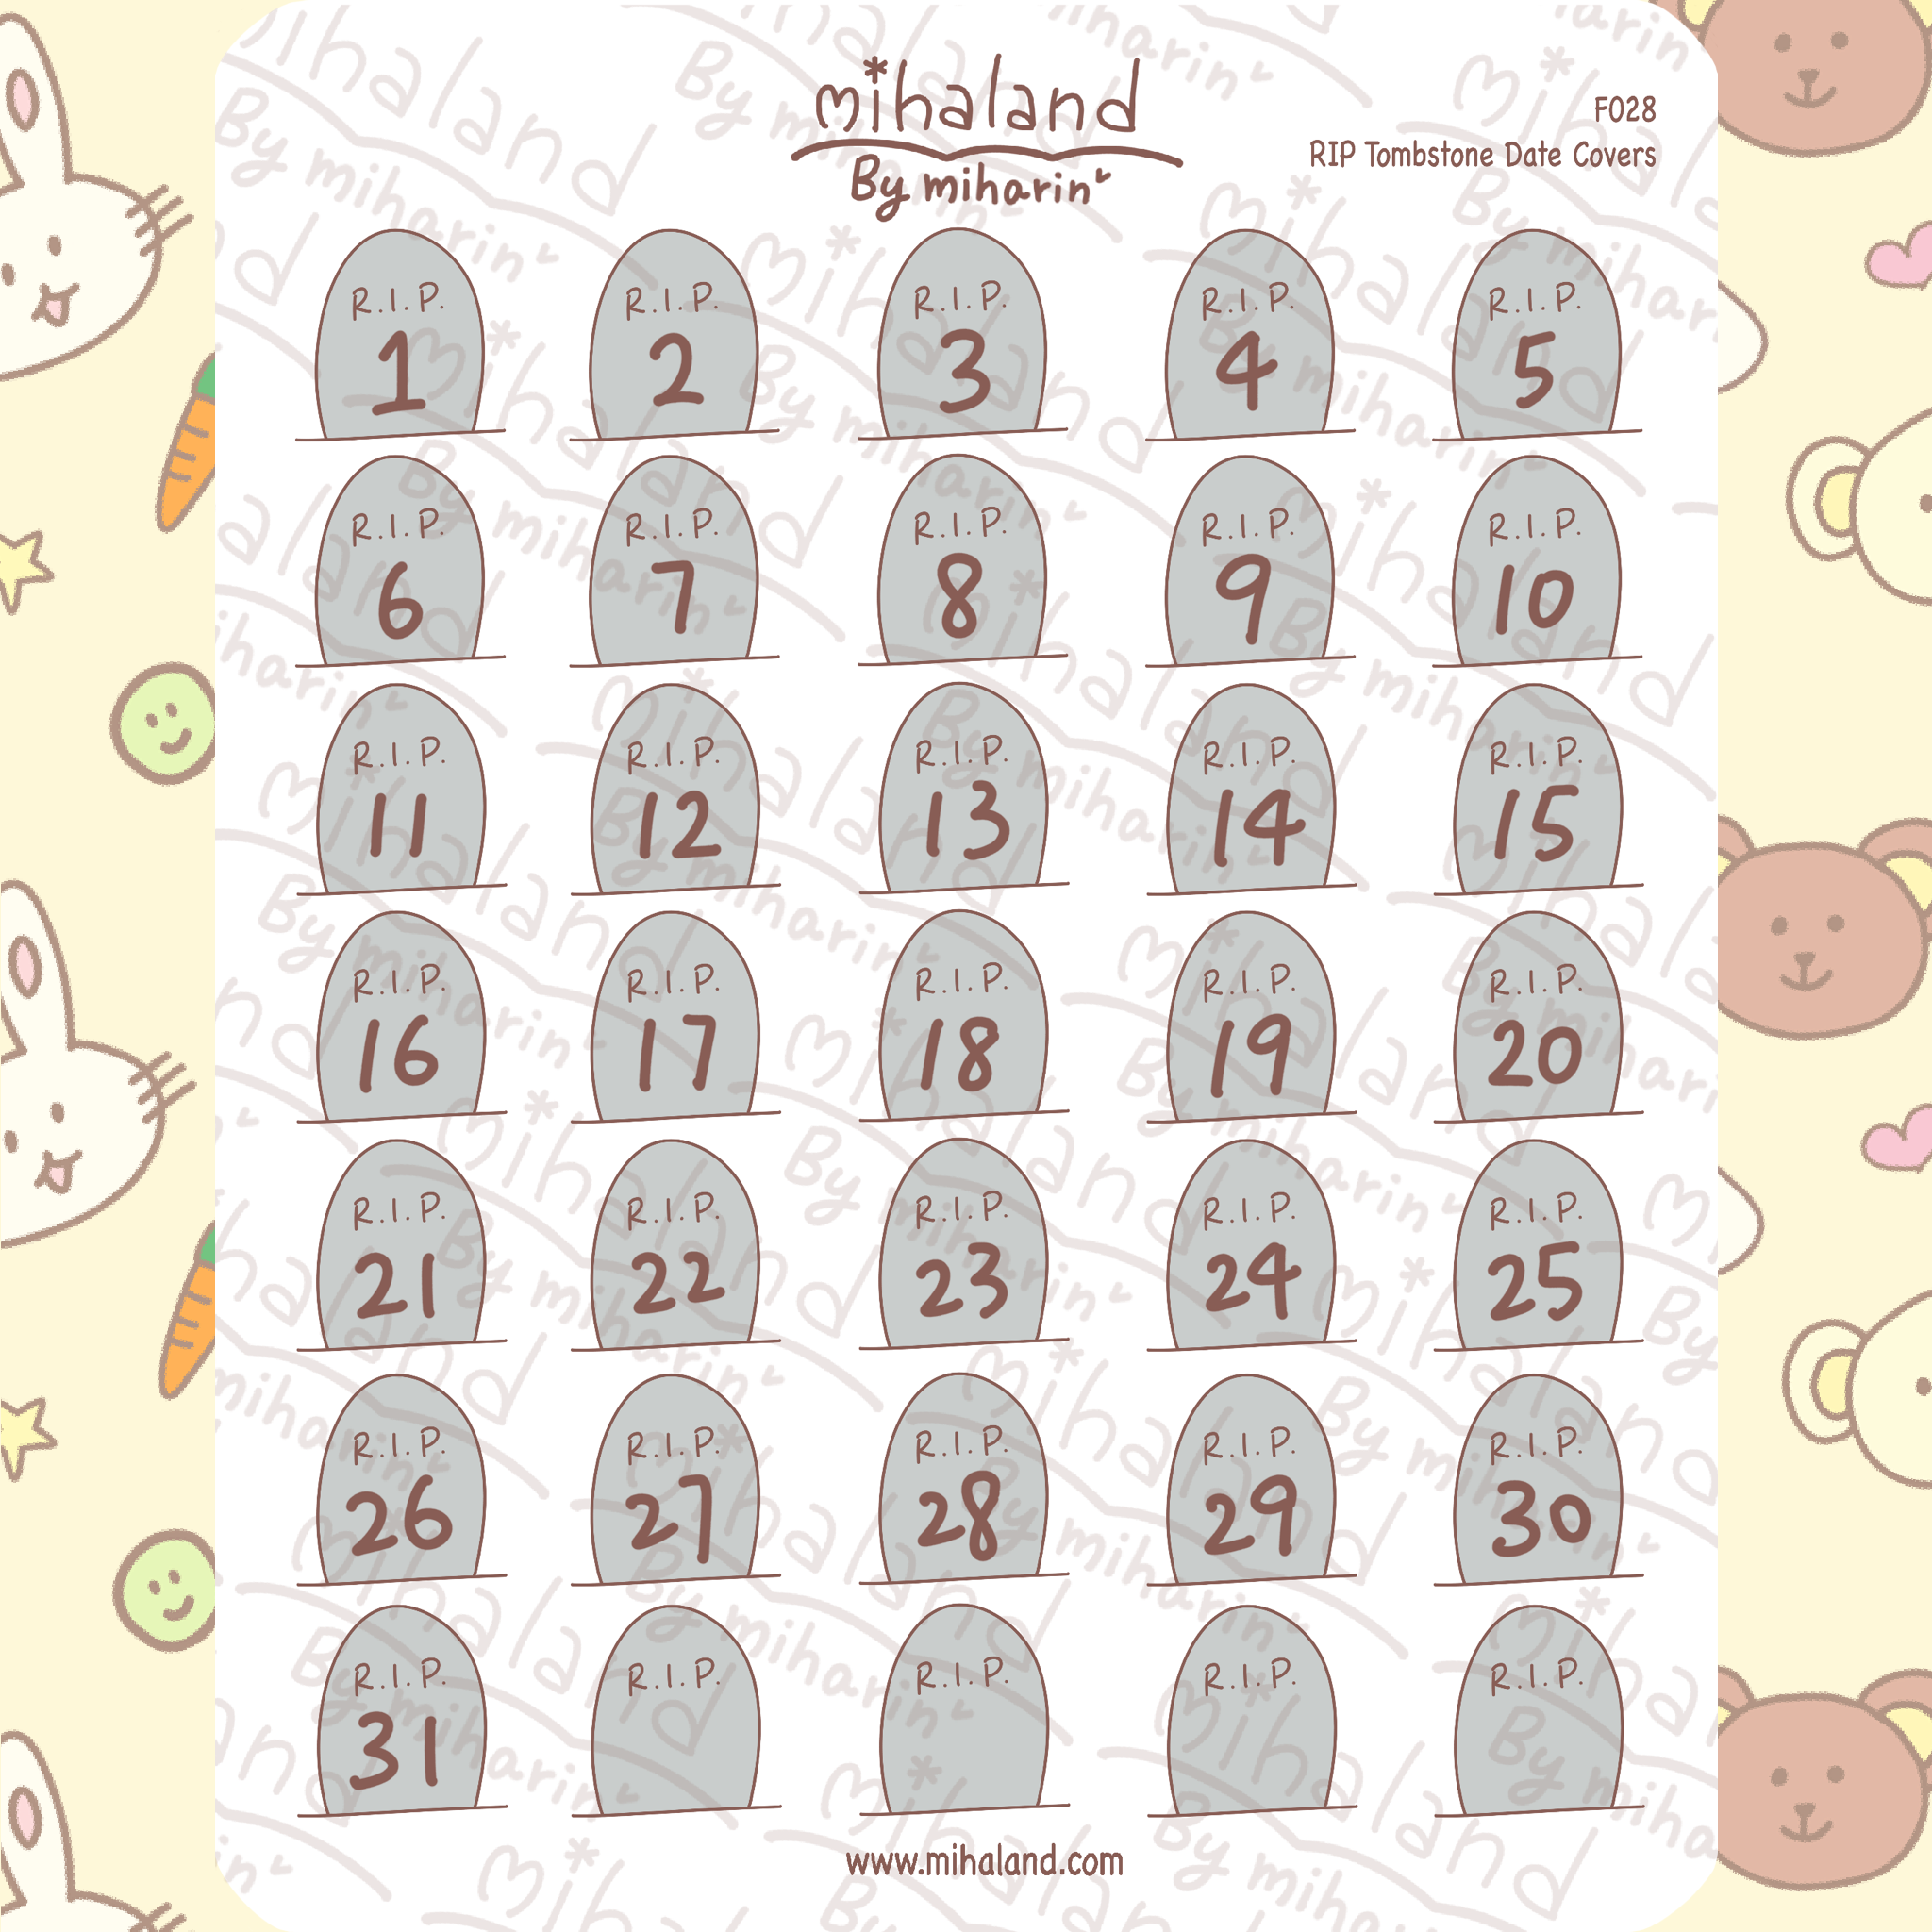 RIP Tombstone Date Covers Planner Stickers (F028)